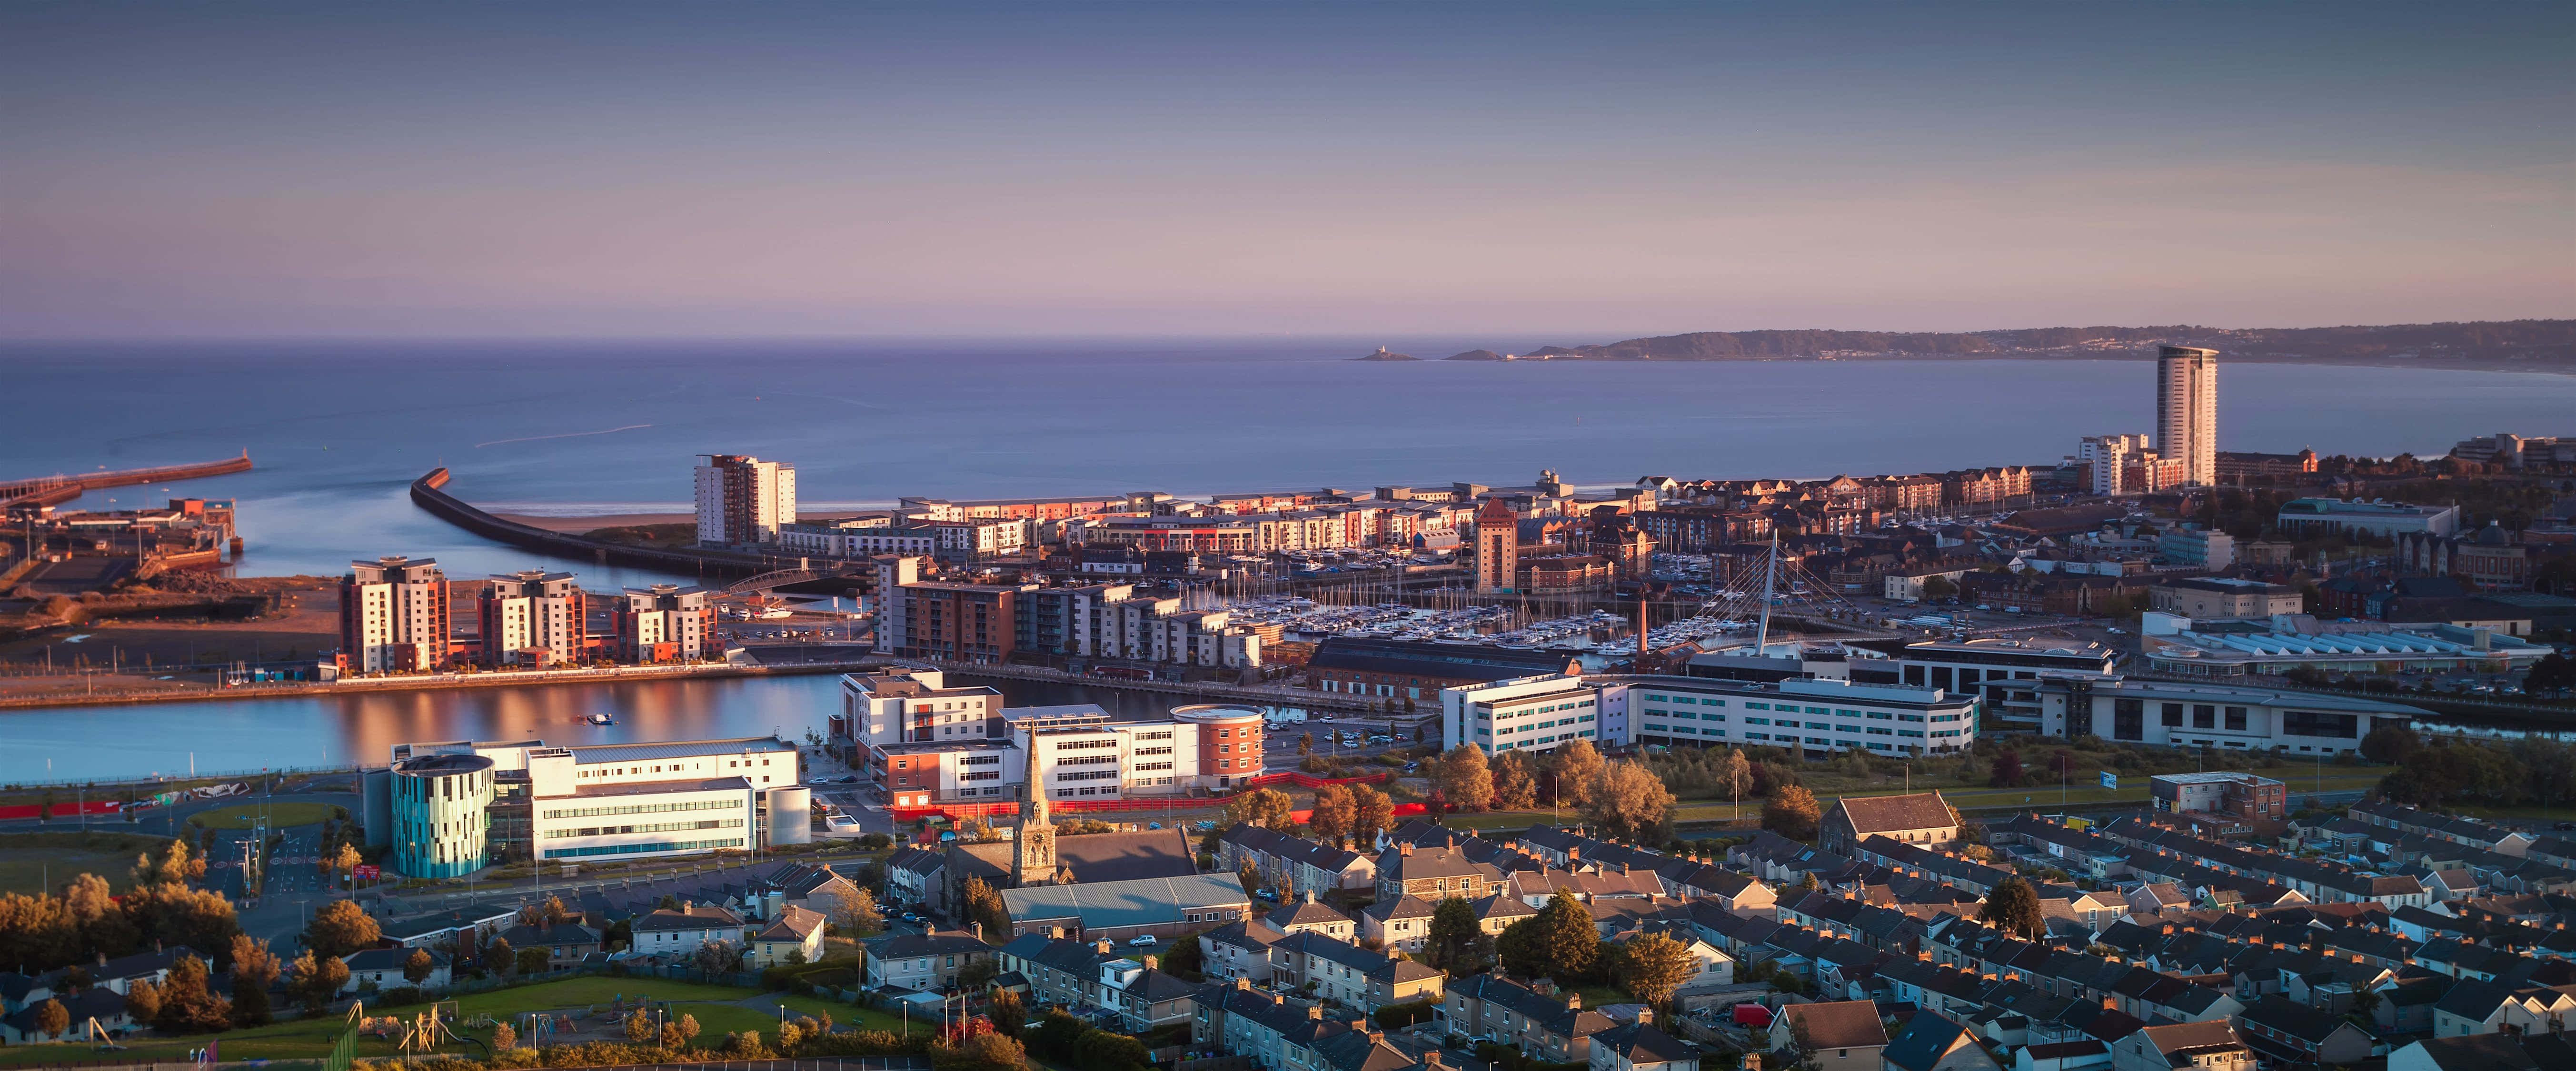 Majestic View Of Swansea Cityscape During Twilight Wallpaper